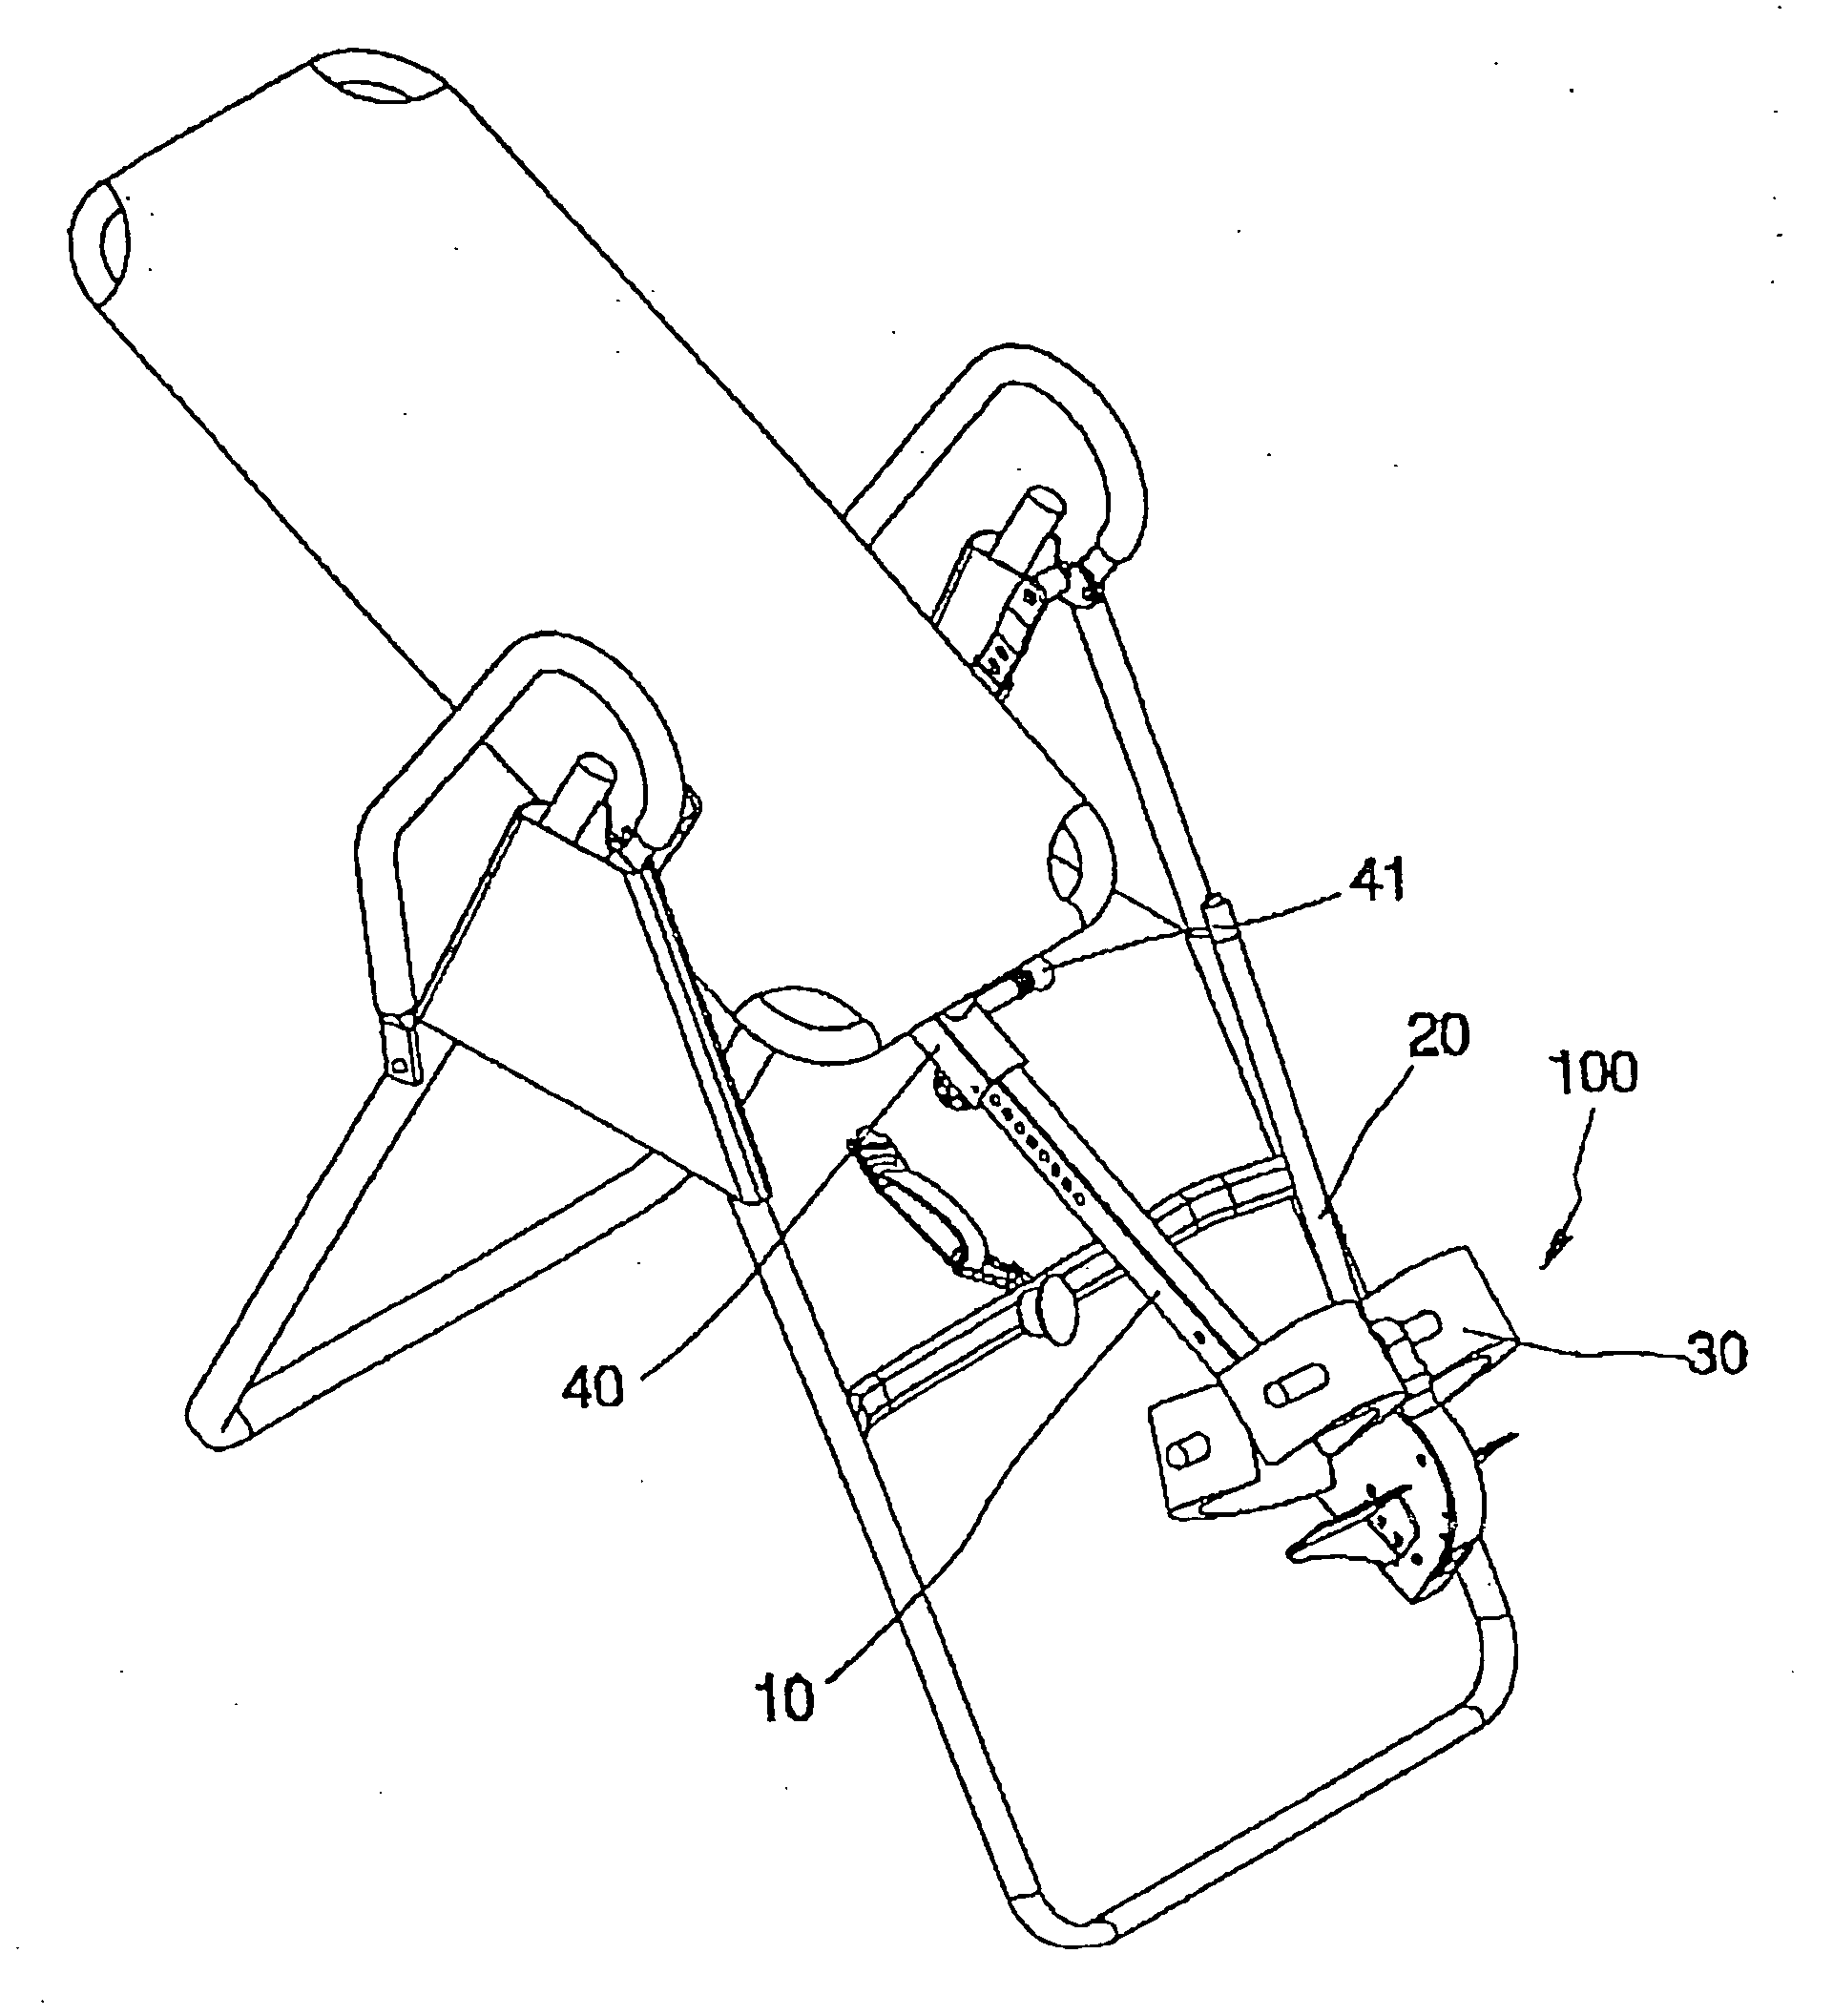 Feet-binding apparatus for a tilting inversion exercise machine